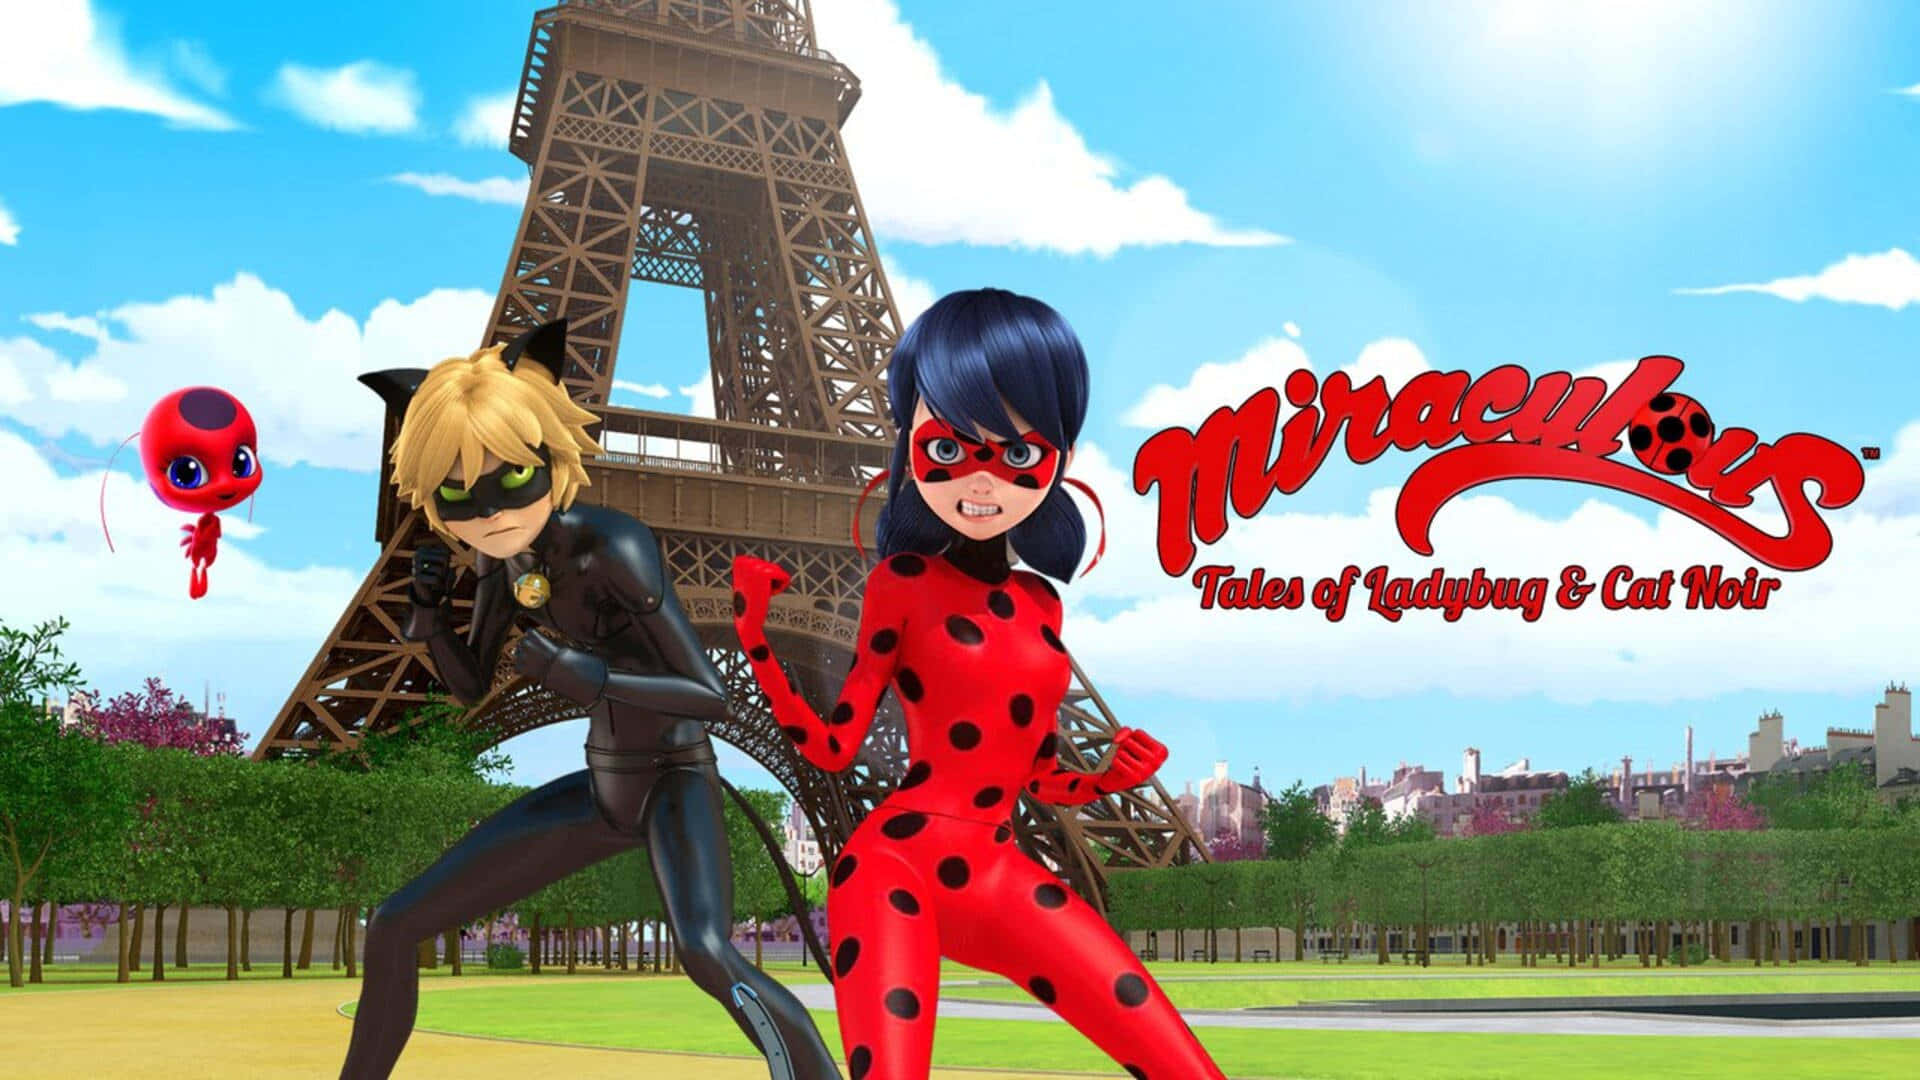 Enjoy the adventure with Ladybug and Cat Noir!